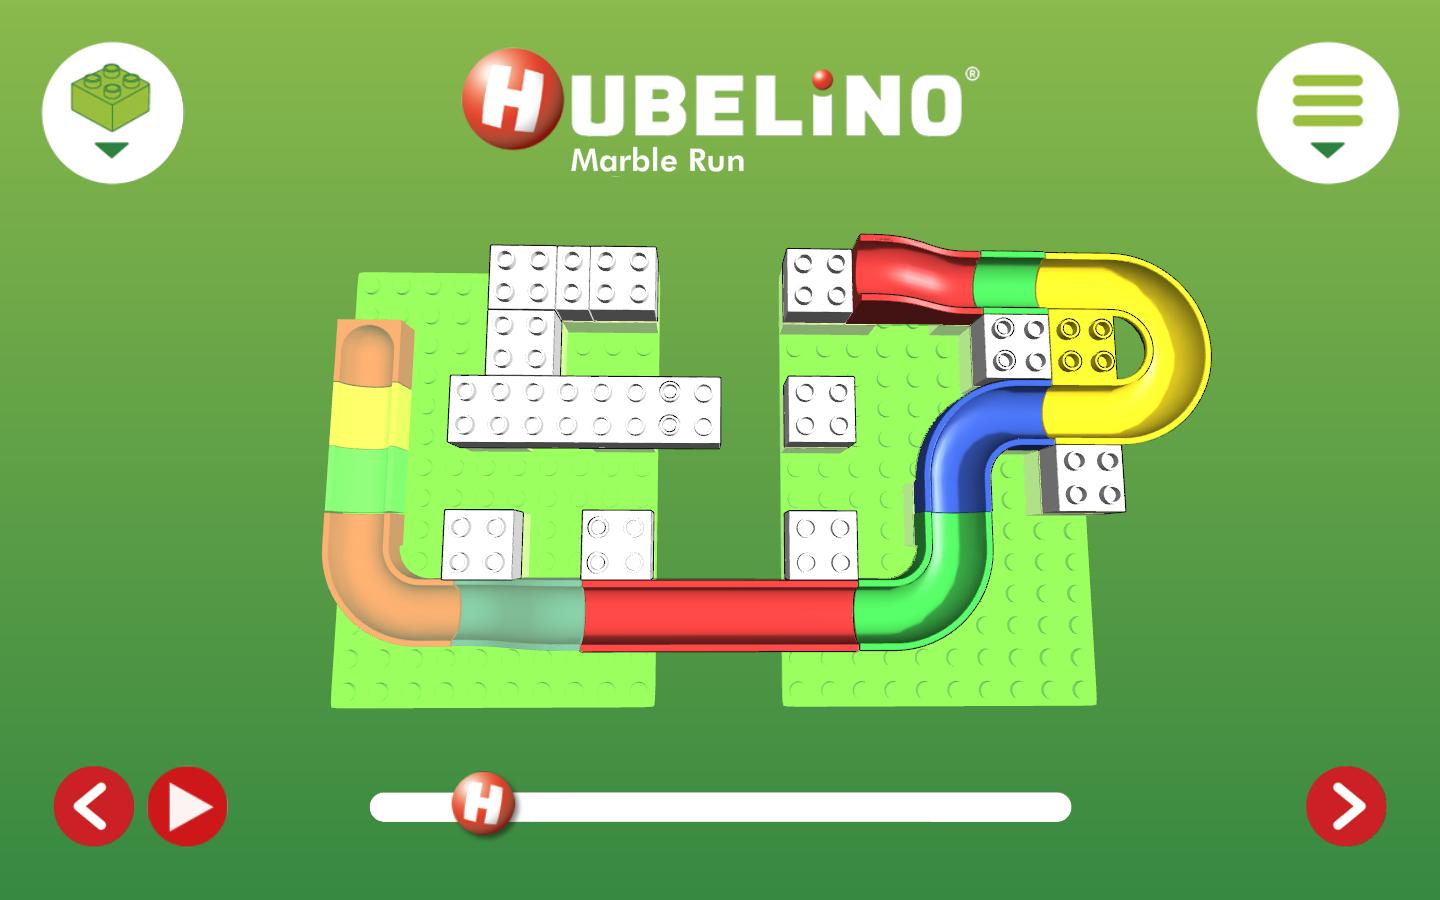 Overweldigend knuffel Amerika Marble Run 3D by Hubelino for Android - APK Download